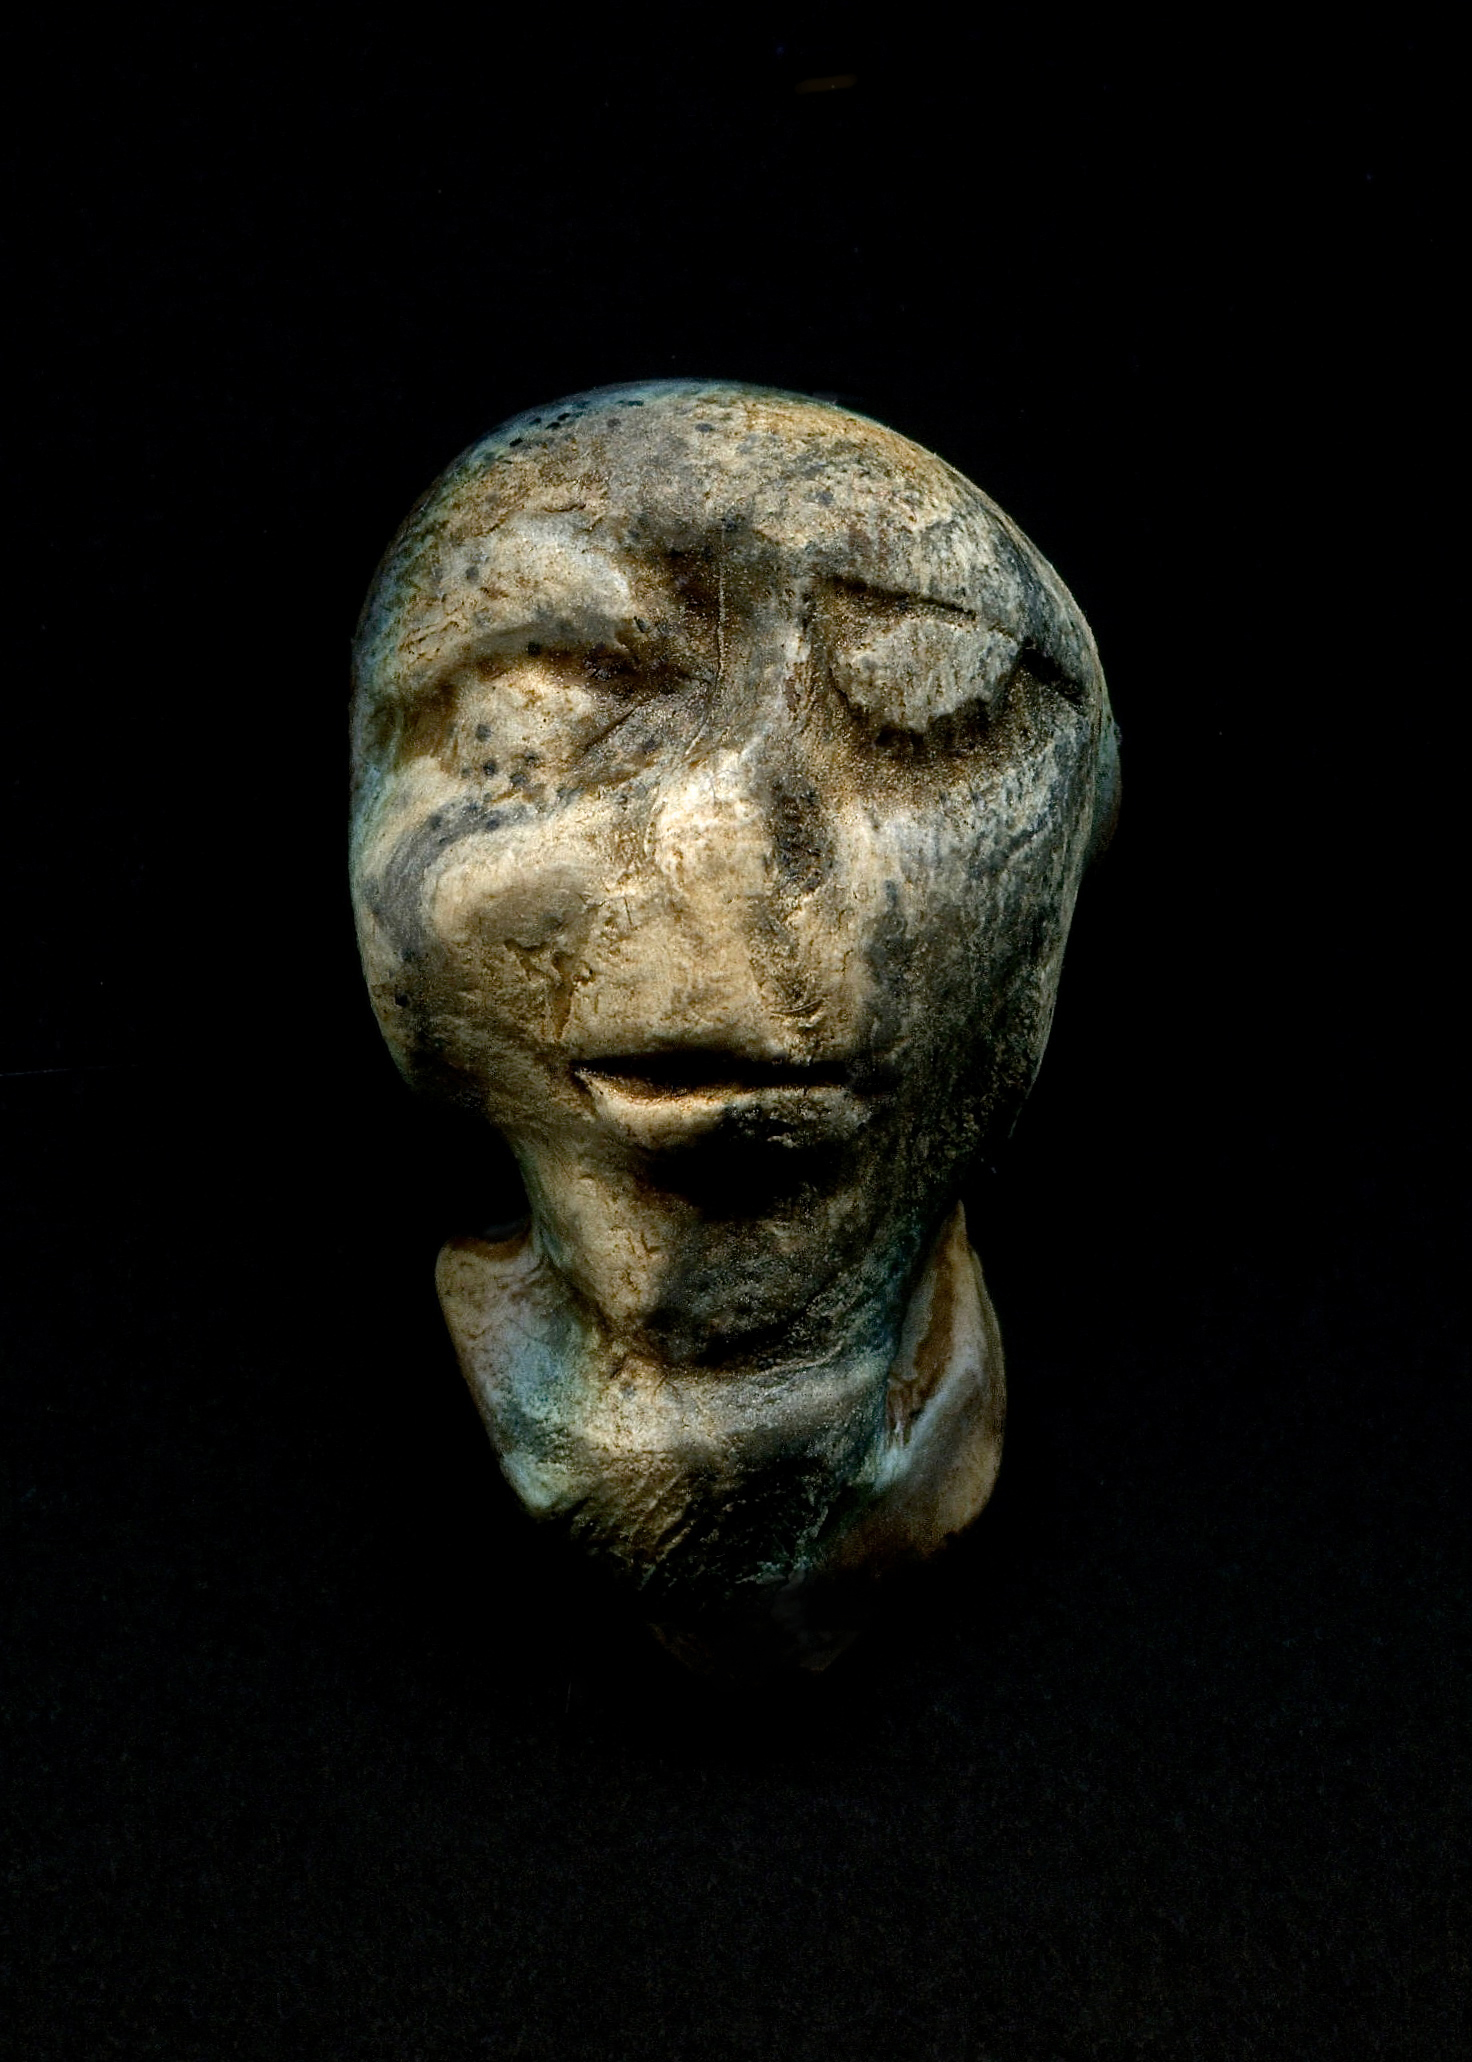 the head of an ancient sculpture with a weird expression